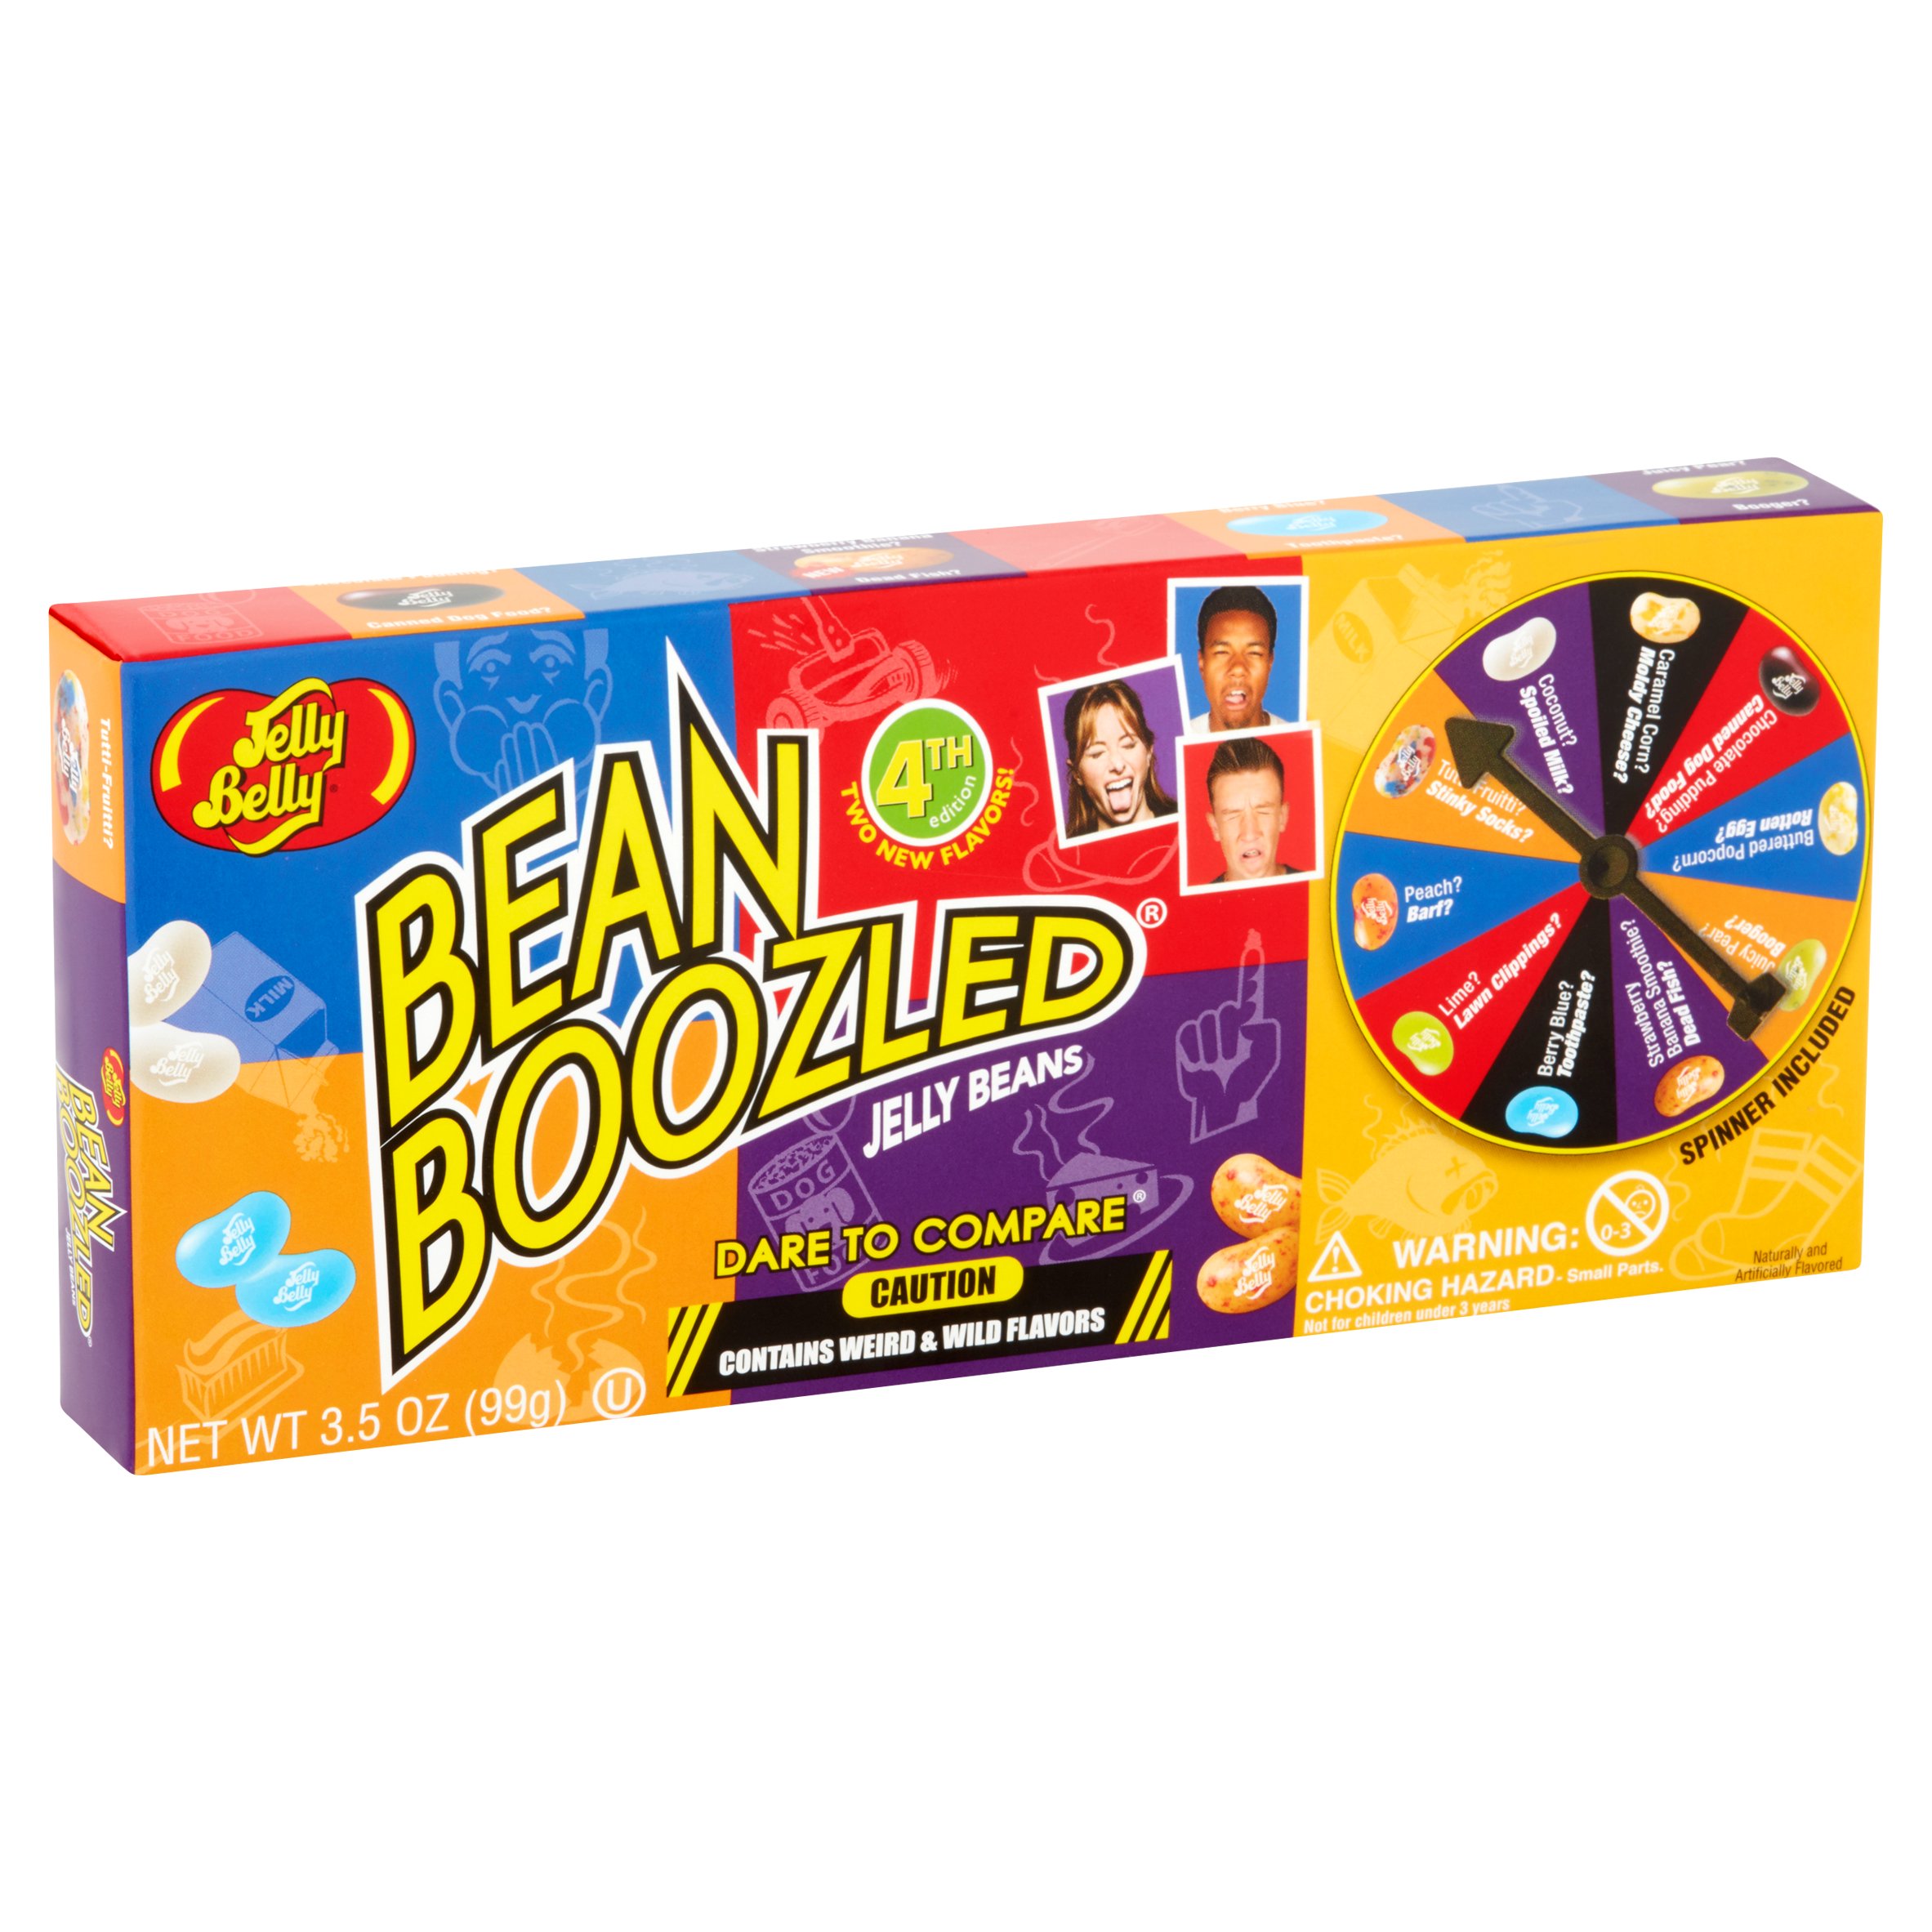 Jelly Belly BeanBoozled Jelly Beans, 20 Assorted Flavors, 3.5 oz Theater Box - image 1 of 9